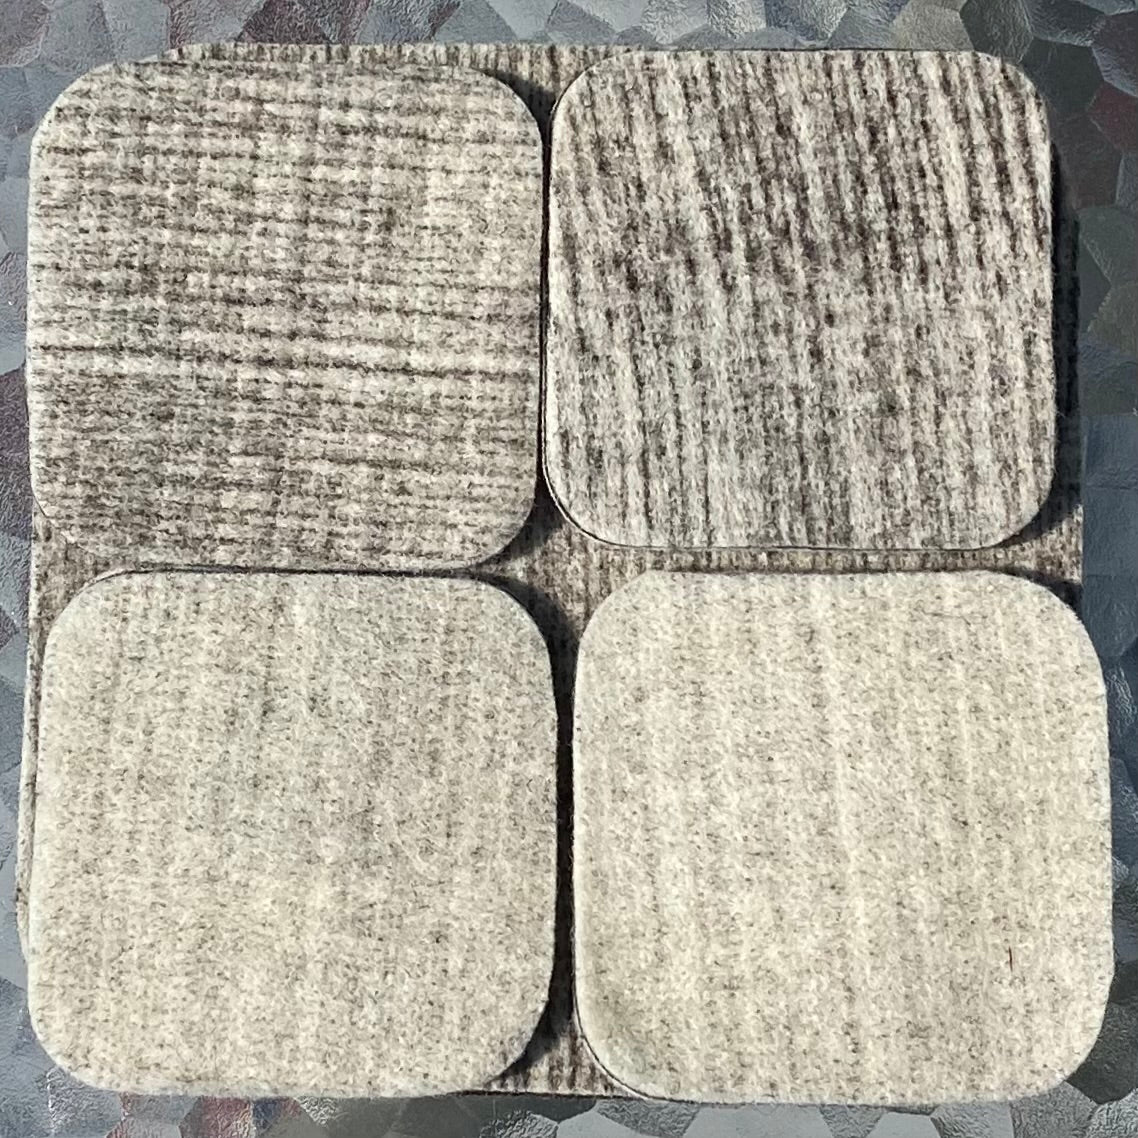 Natural & brown coasters shown. One side is natually lighter than the other due to the needle felting process. Coasters are reversible. 100% Devilsbliss Farm wool. 